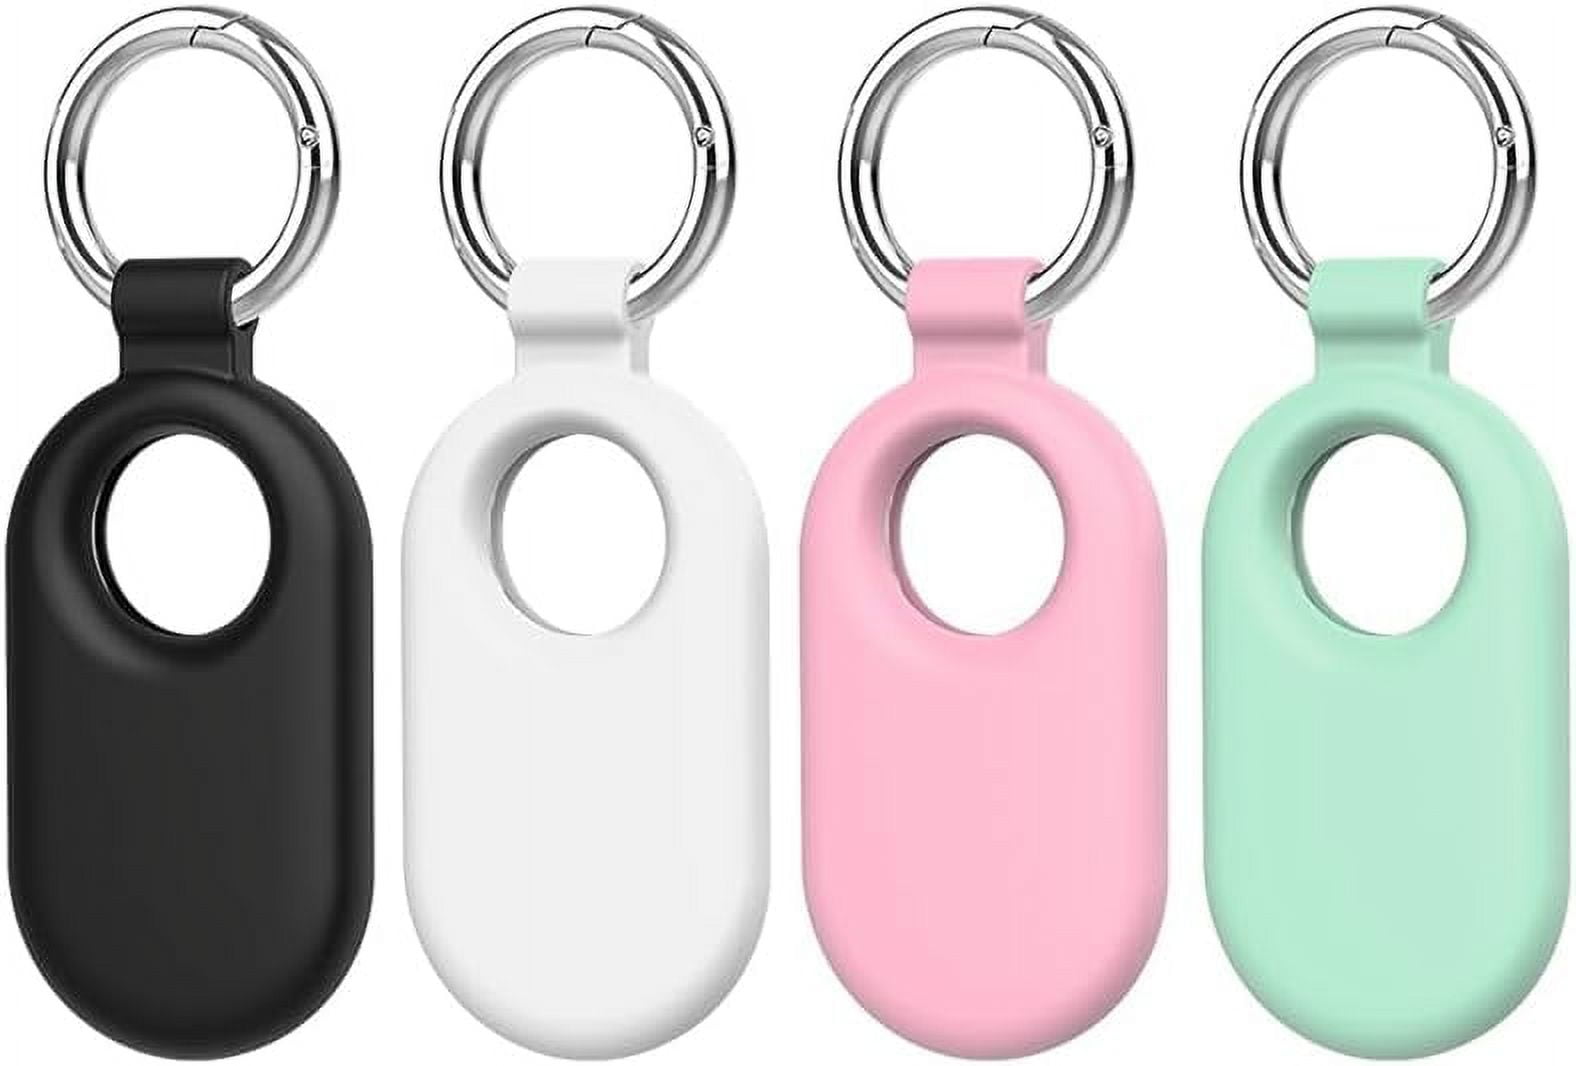 Frusde for Samsung Galaxy Case SmartTag2 4pcs Keys with for Galaxy Tag Case, for Silicone Protective 2 Ring Key Smart